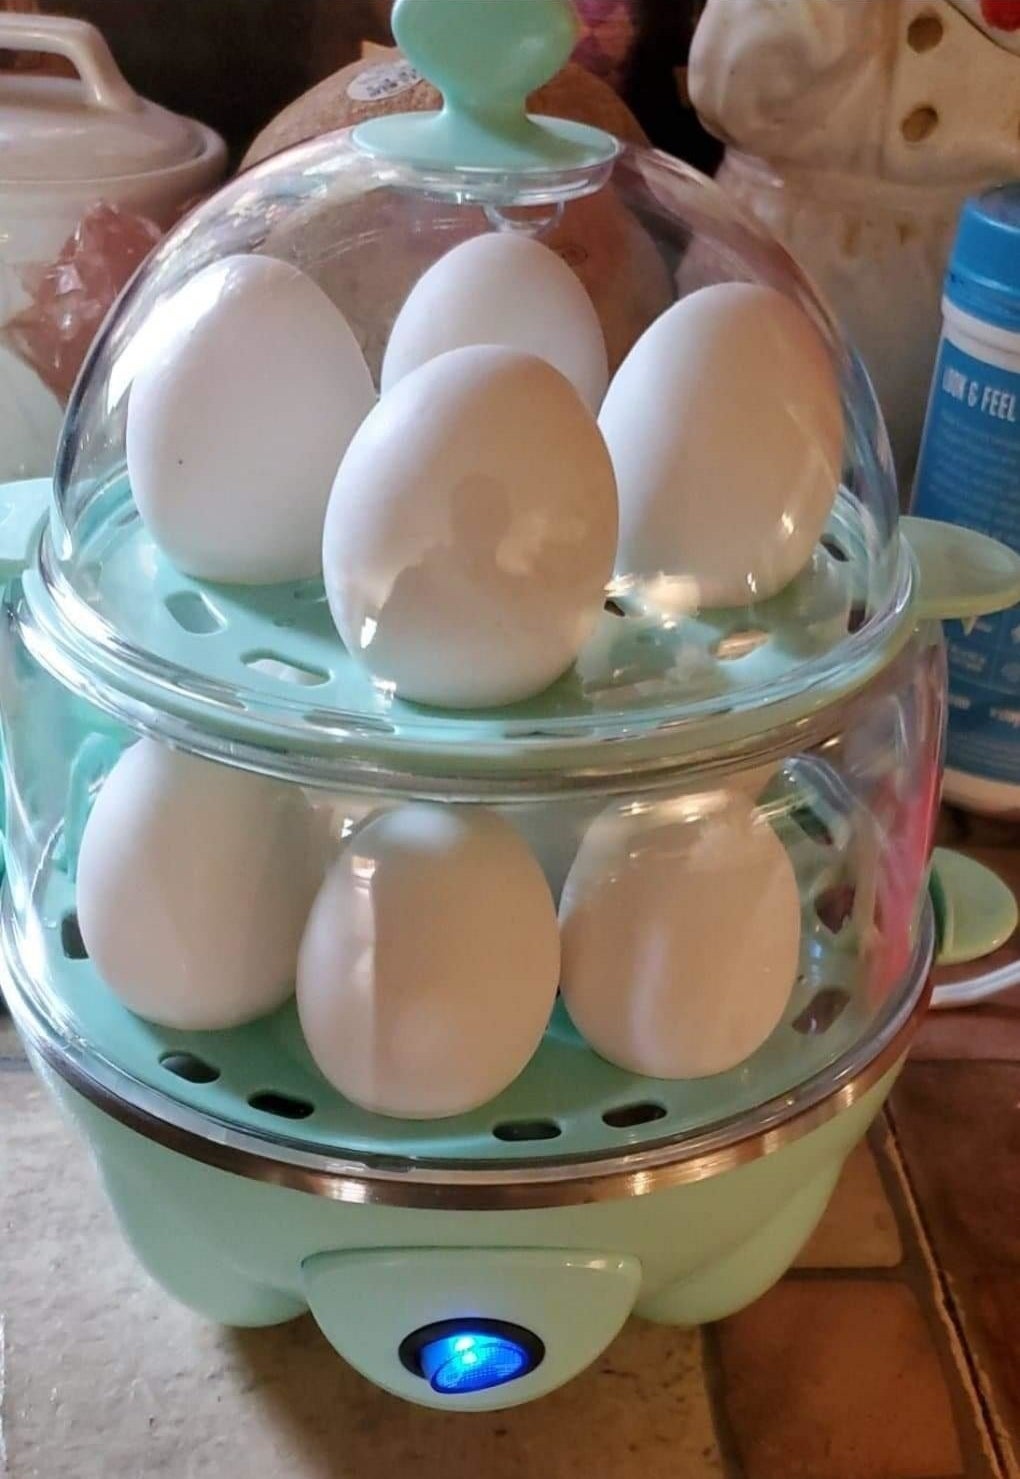 A reviewer uses the teal-colored cooker to boil a dozen white eggs